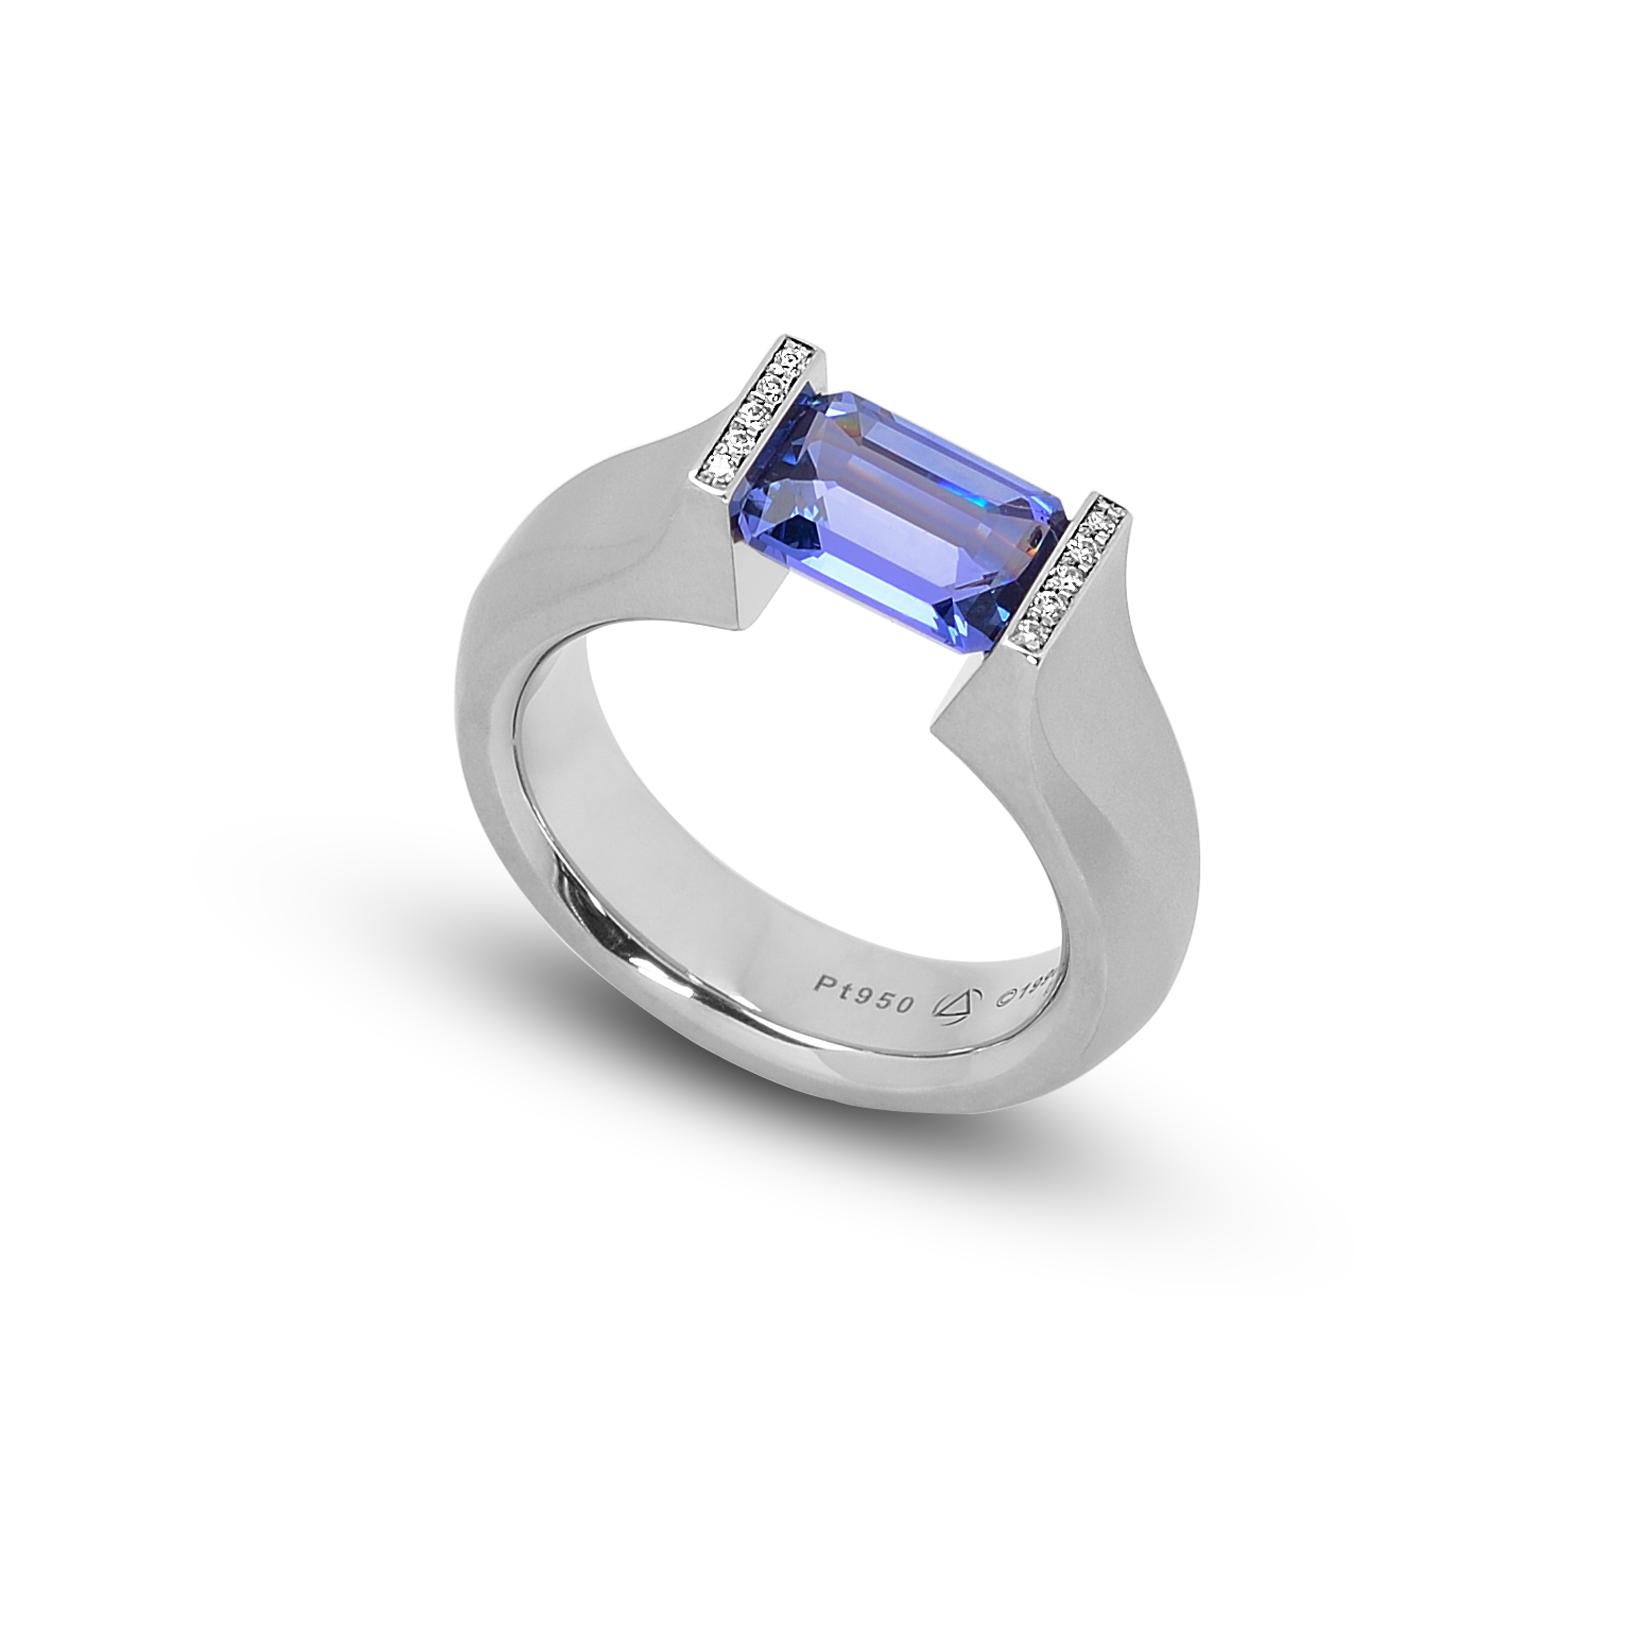 Modern Steven Kretchmer Platinum SHO Ring with a Tension-Set Blue Sapphire For Sale